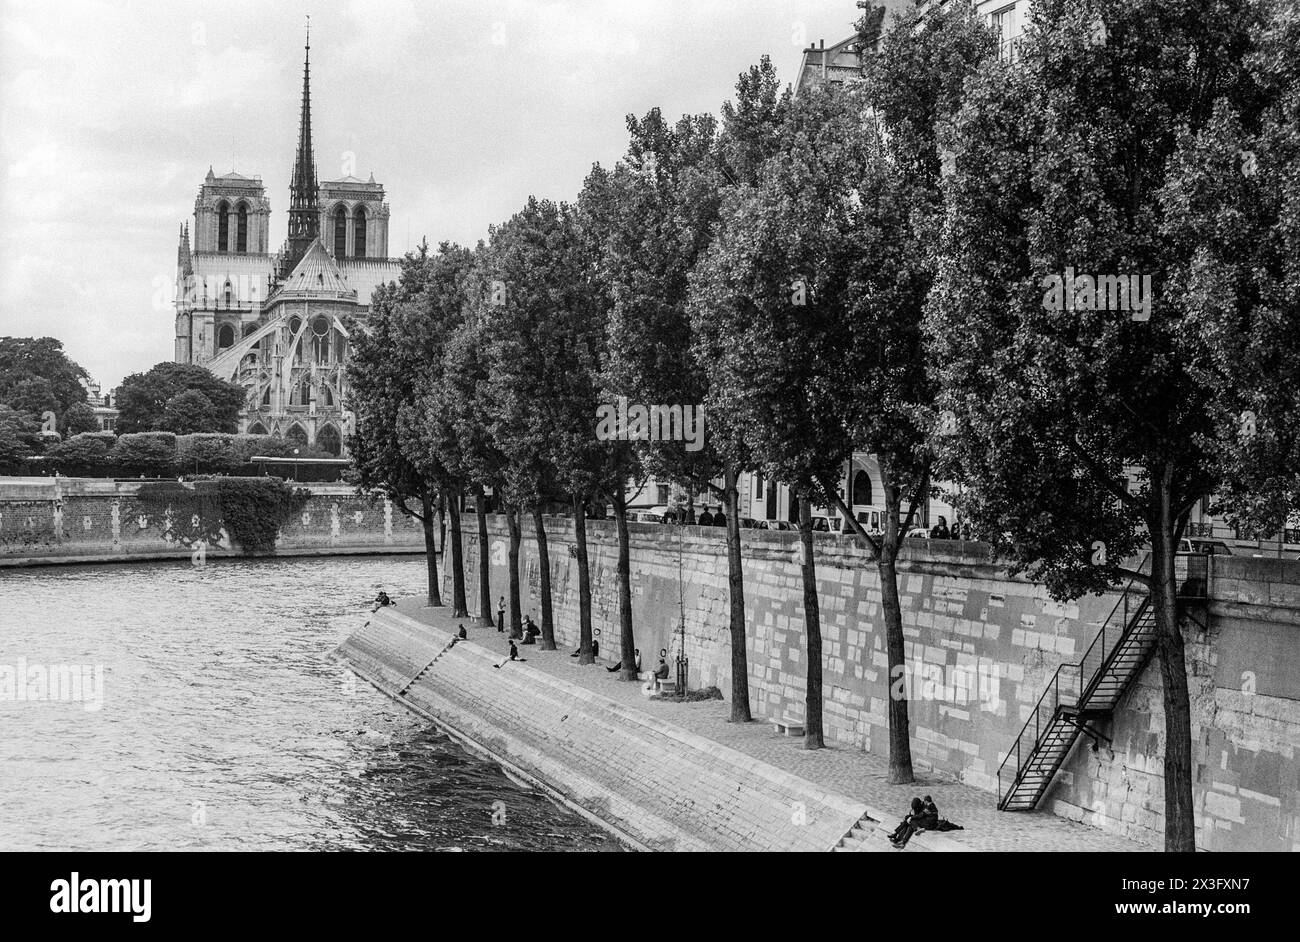 1990s archive black & white photograph of the Quai d'Orleans on the Ile Saint-Louis in Paris.  The view is to the NW along the Seine, with Notre Dame and the Ile de la Cite in the background. Stock Photo